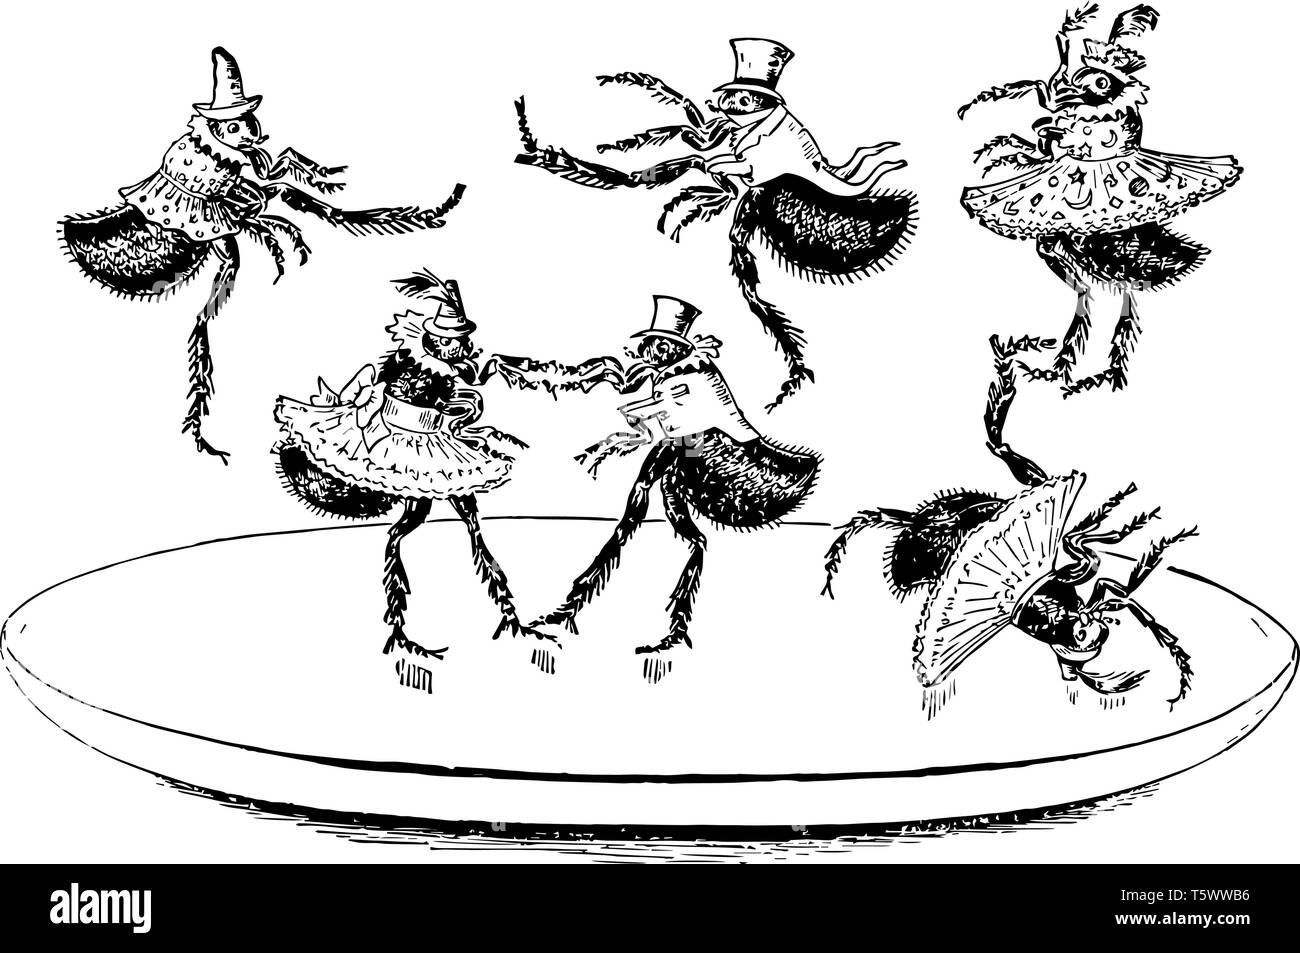 Flea Dance this scene shows six fleas dancing on a platform two fleas are dancing together as a pair and other three fleas are flying off of the platf Stock Vector